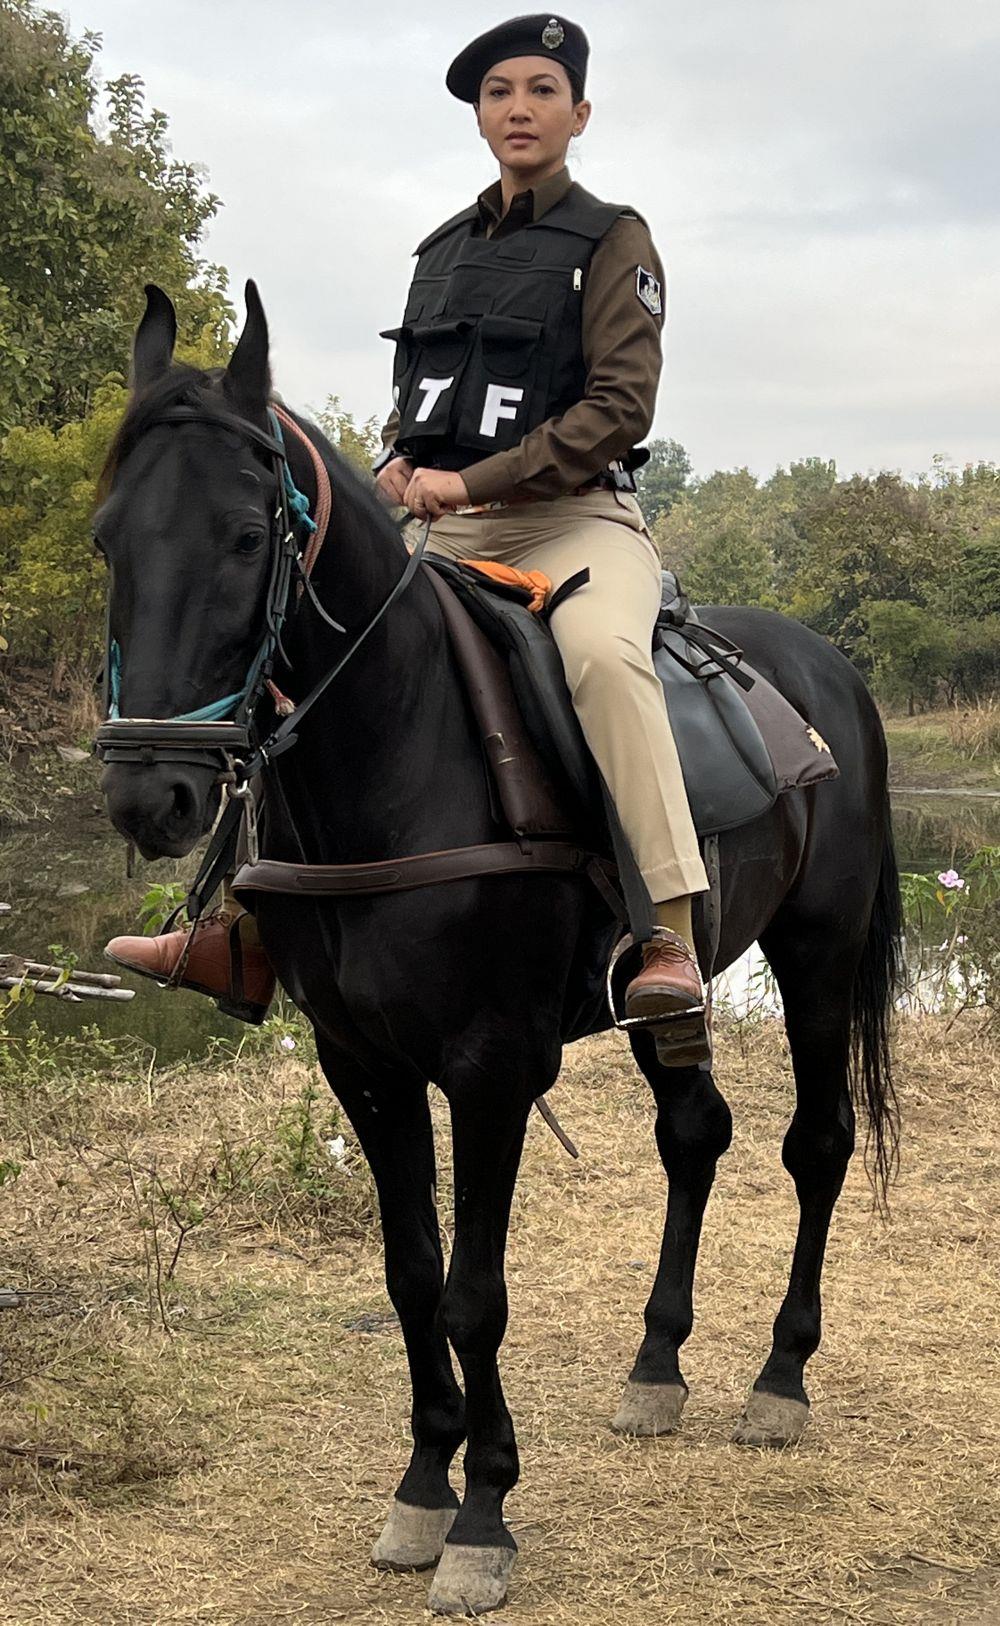 Gauahar Khan learns to ride a horse for her upcoming show Shiksha Mandal